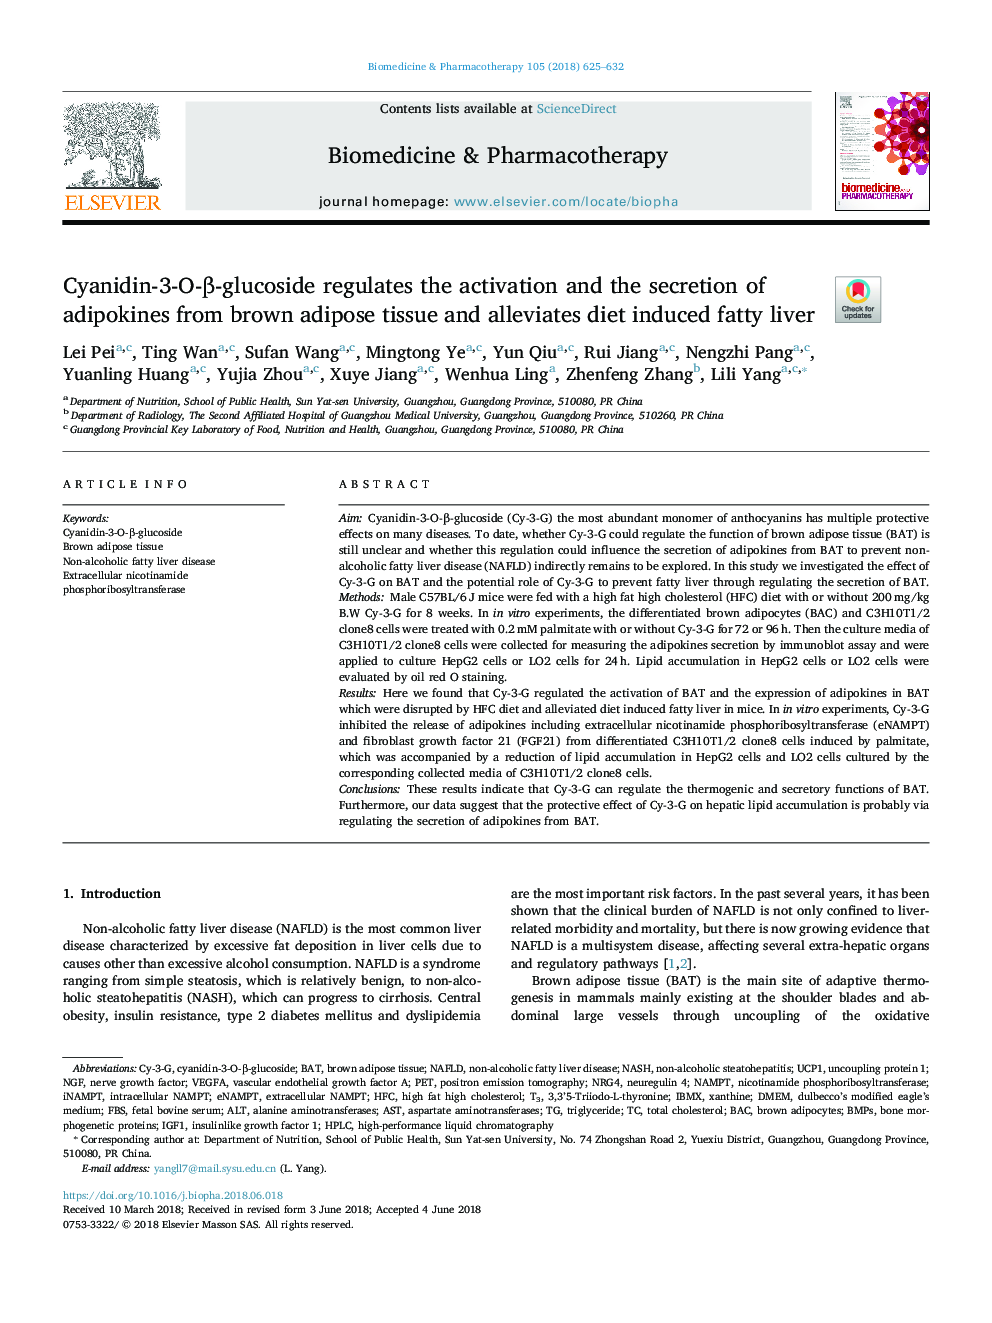 Cyanidin-3-O-Î²-glucoside regulates the activation and the secretion of adipokines from brown adipose tissue and alleviates diet induced fatty liver